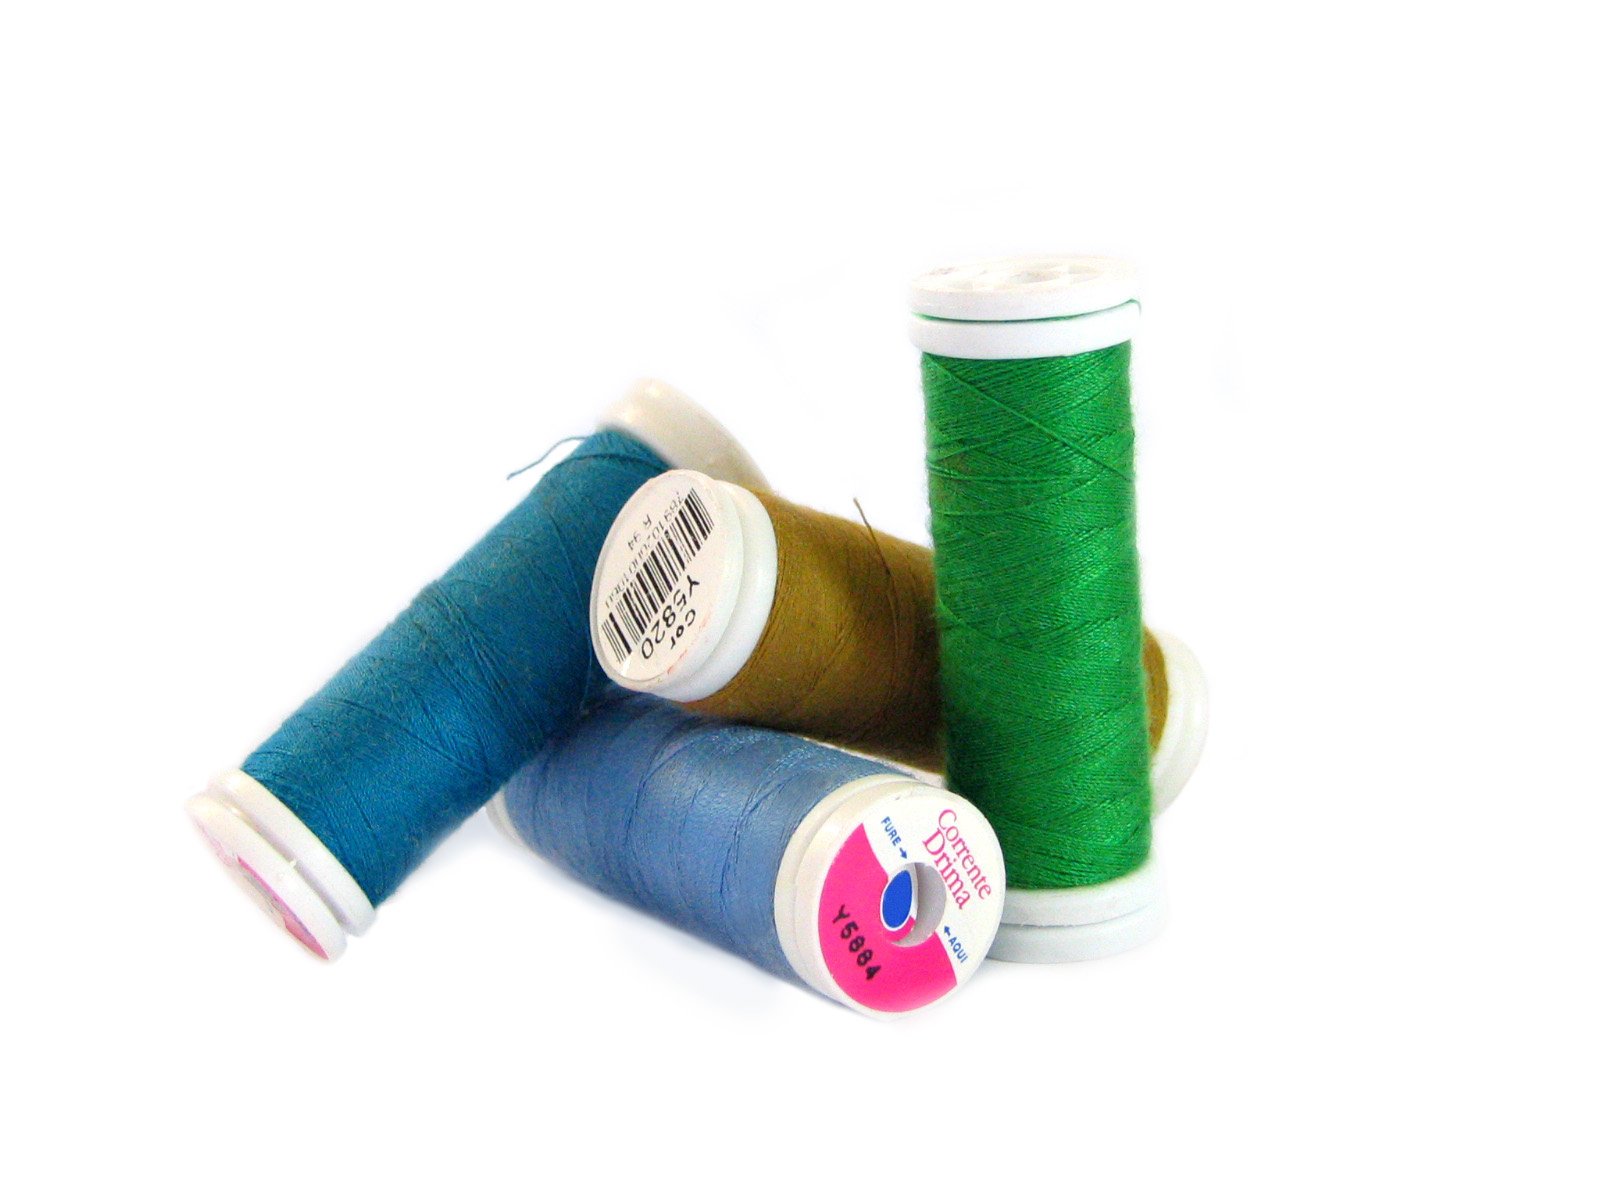 three spools of colorful thread sitting on a white surface